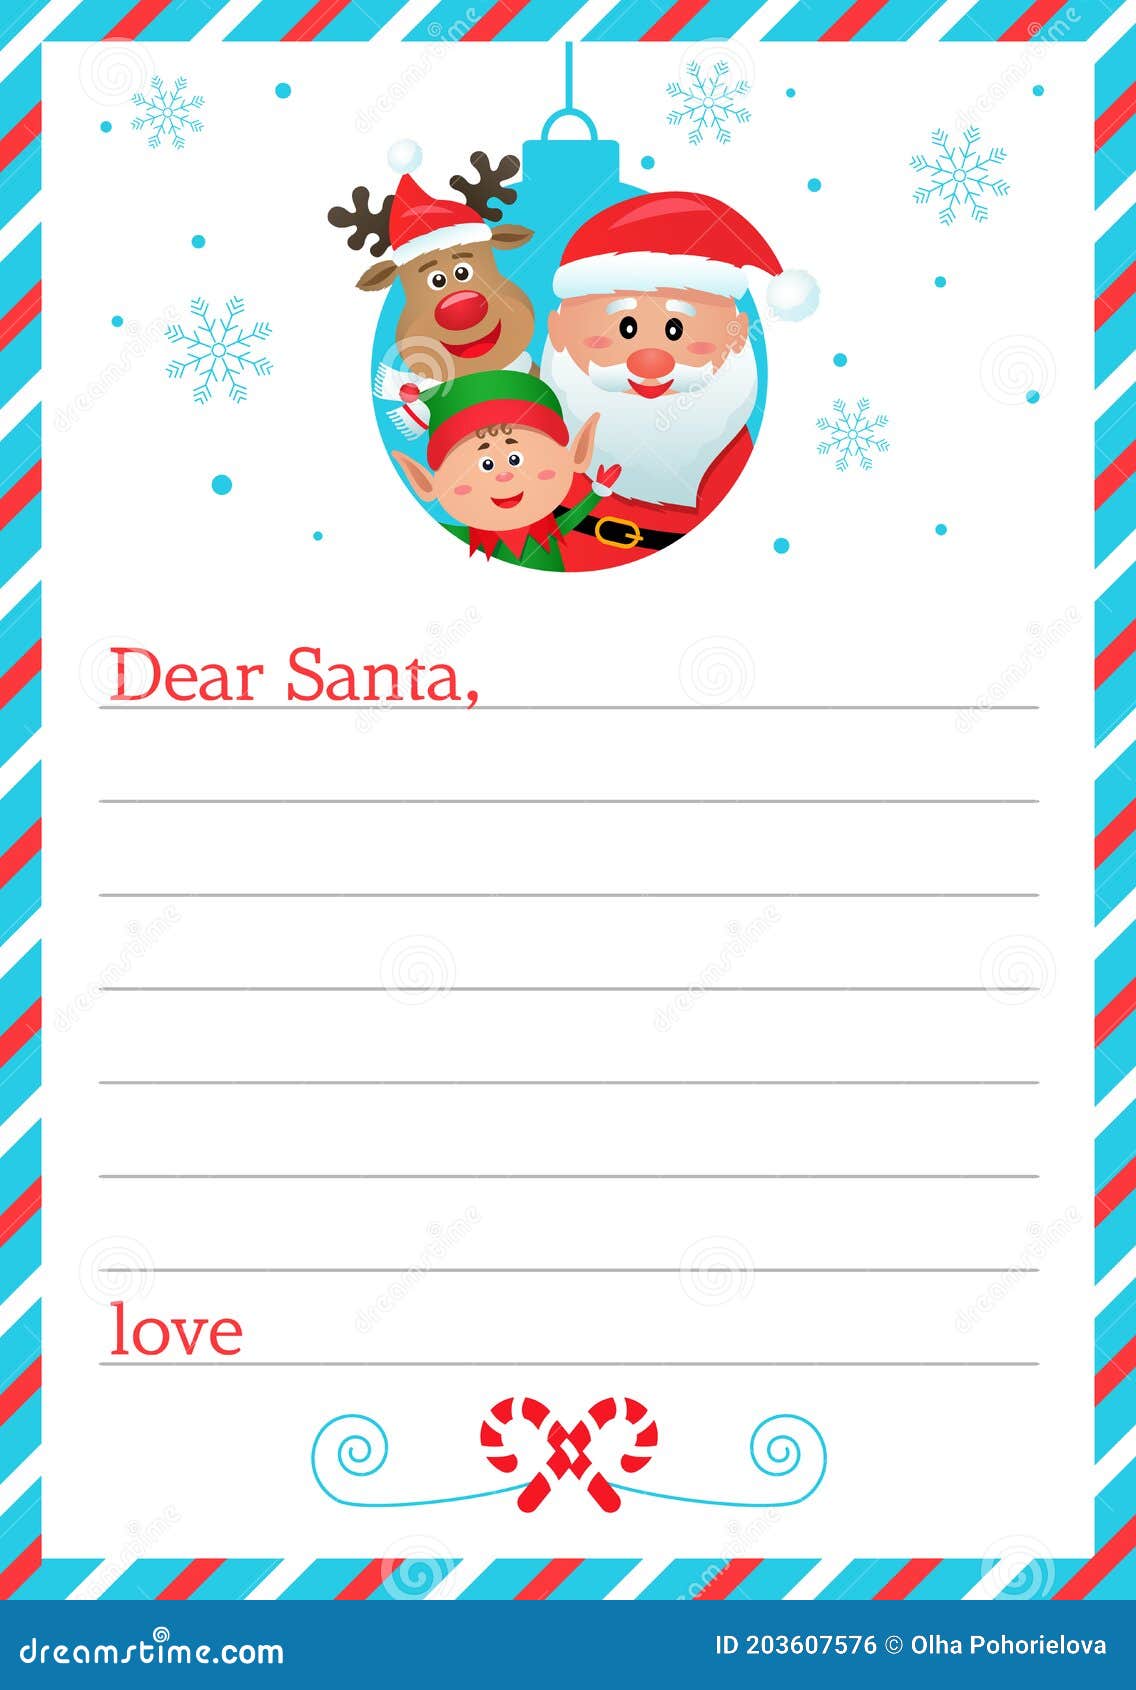 Dear Santa Claus, Blank Letter Template with Christmas Symbols. Stock ...